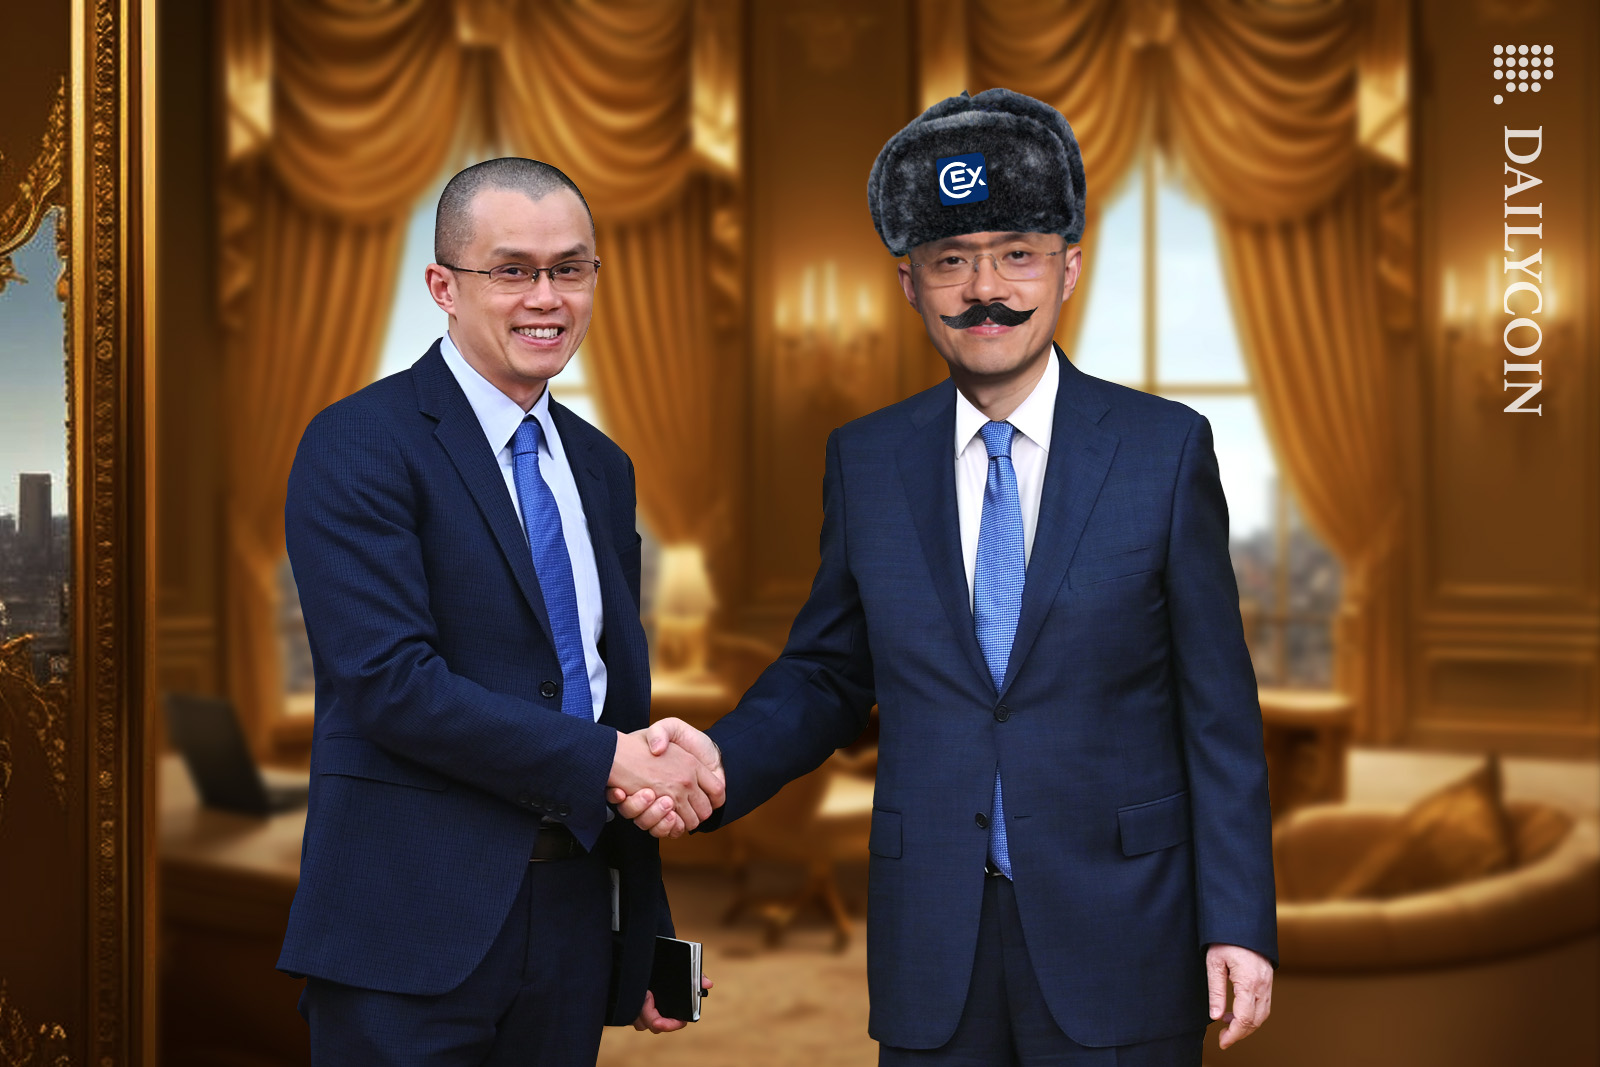 Changpeng Zhao shaking the hand of a russian business man who looks a bit like him.